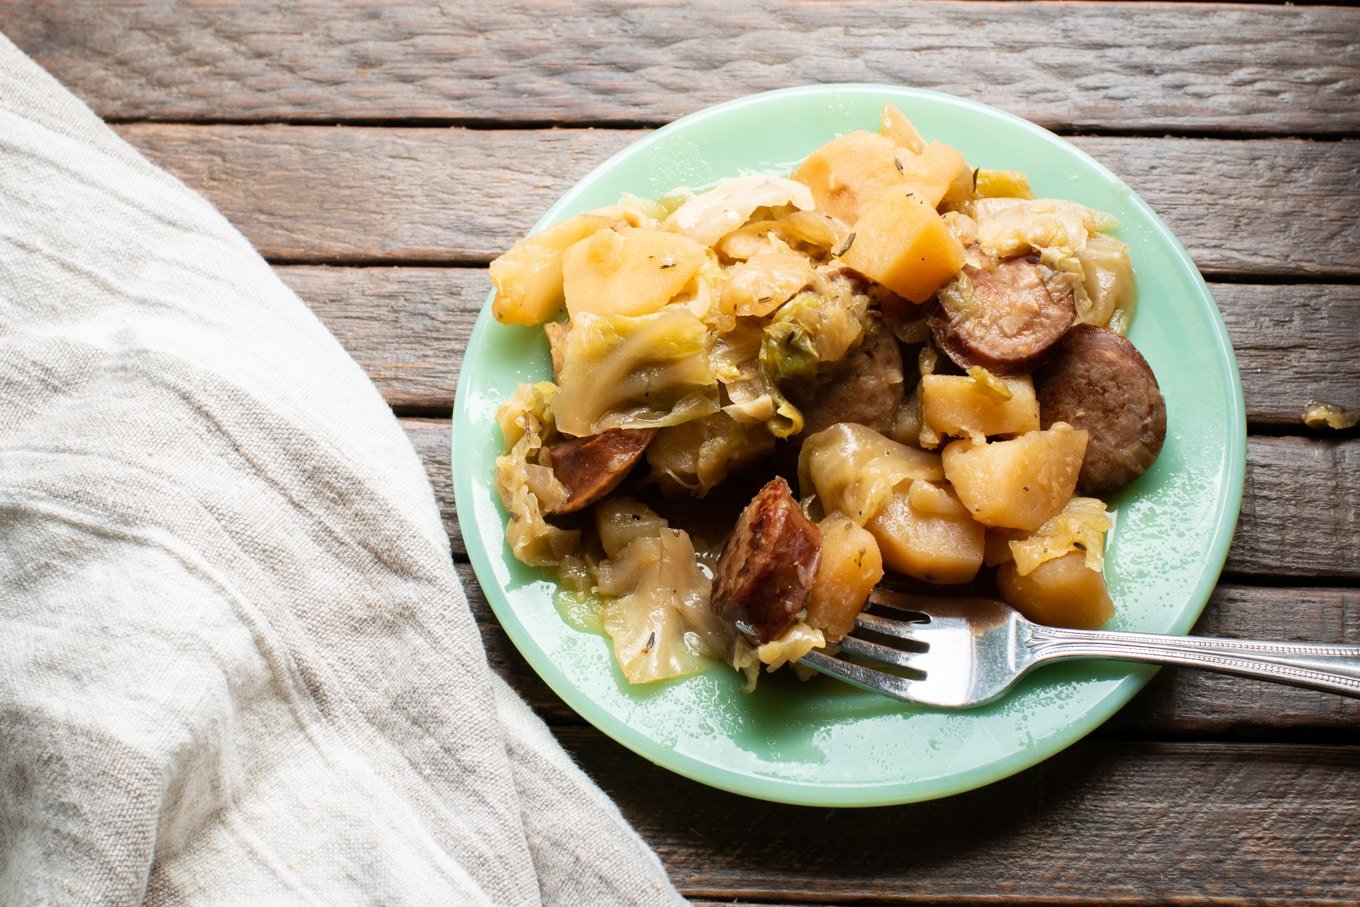 Plate with cooked kielbasa, potato and cabbage.